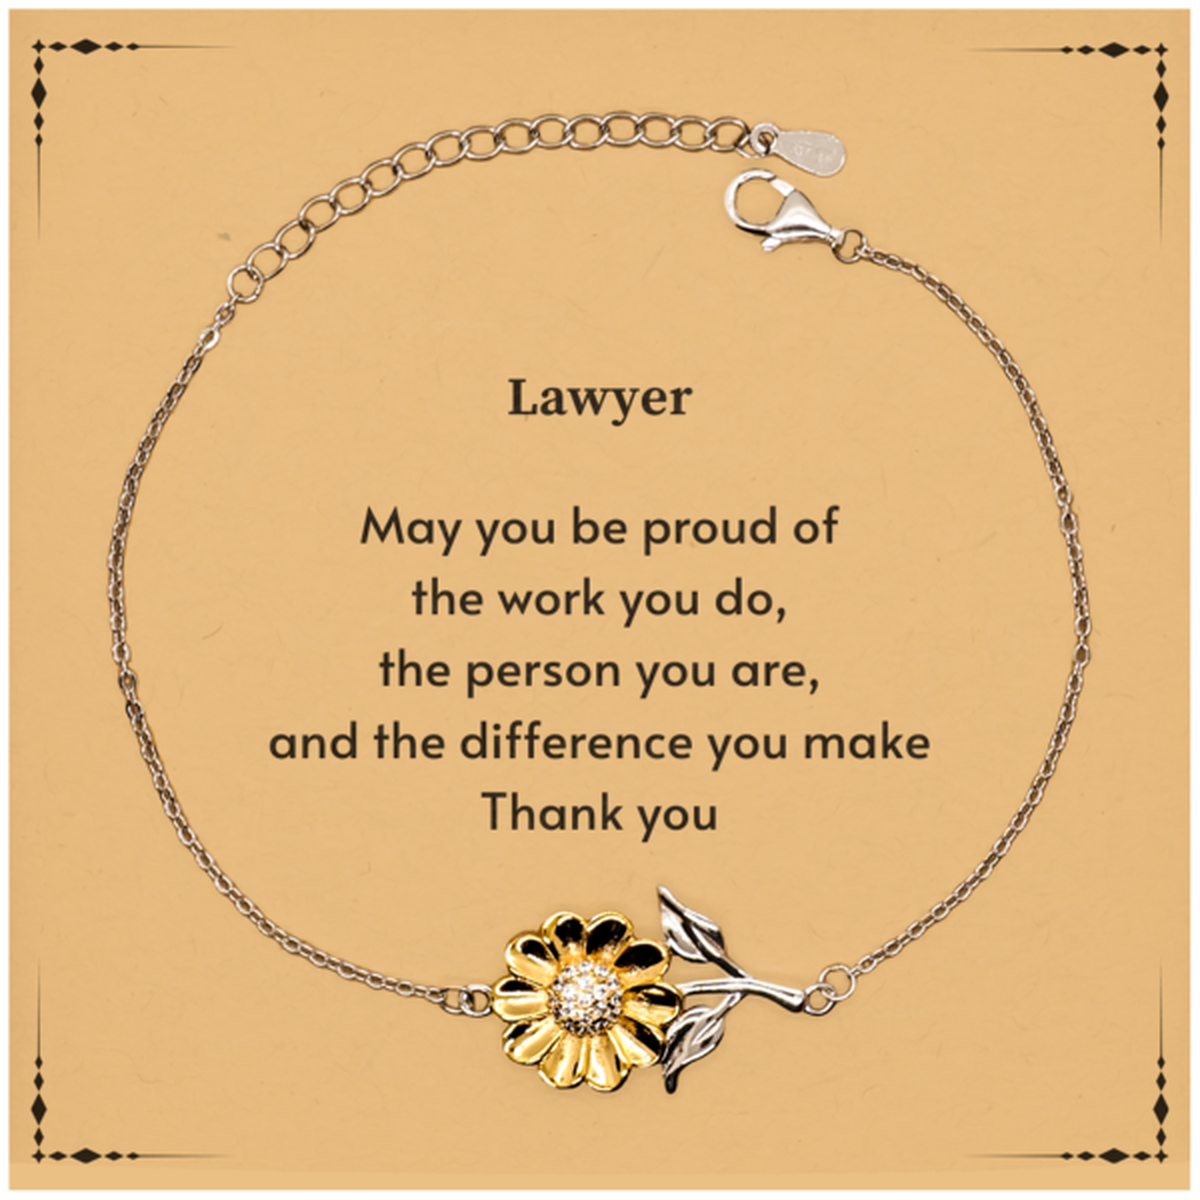 Heartwarming Sunflower Bracelet Retirement Coworkers Gifts for Lawyer, Lawyer May You be proud of the work you do, the person you are Gifts for Boss Men Women Friends